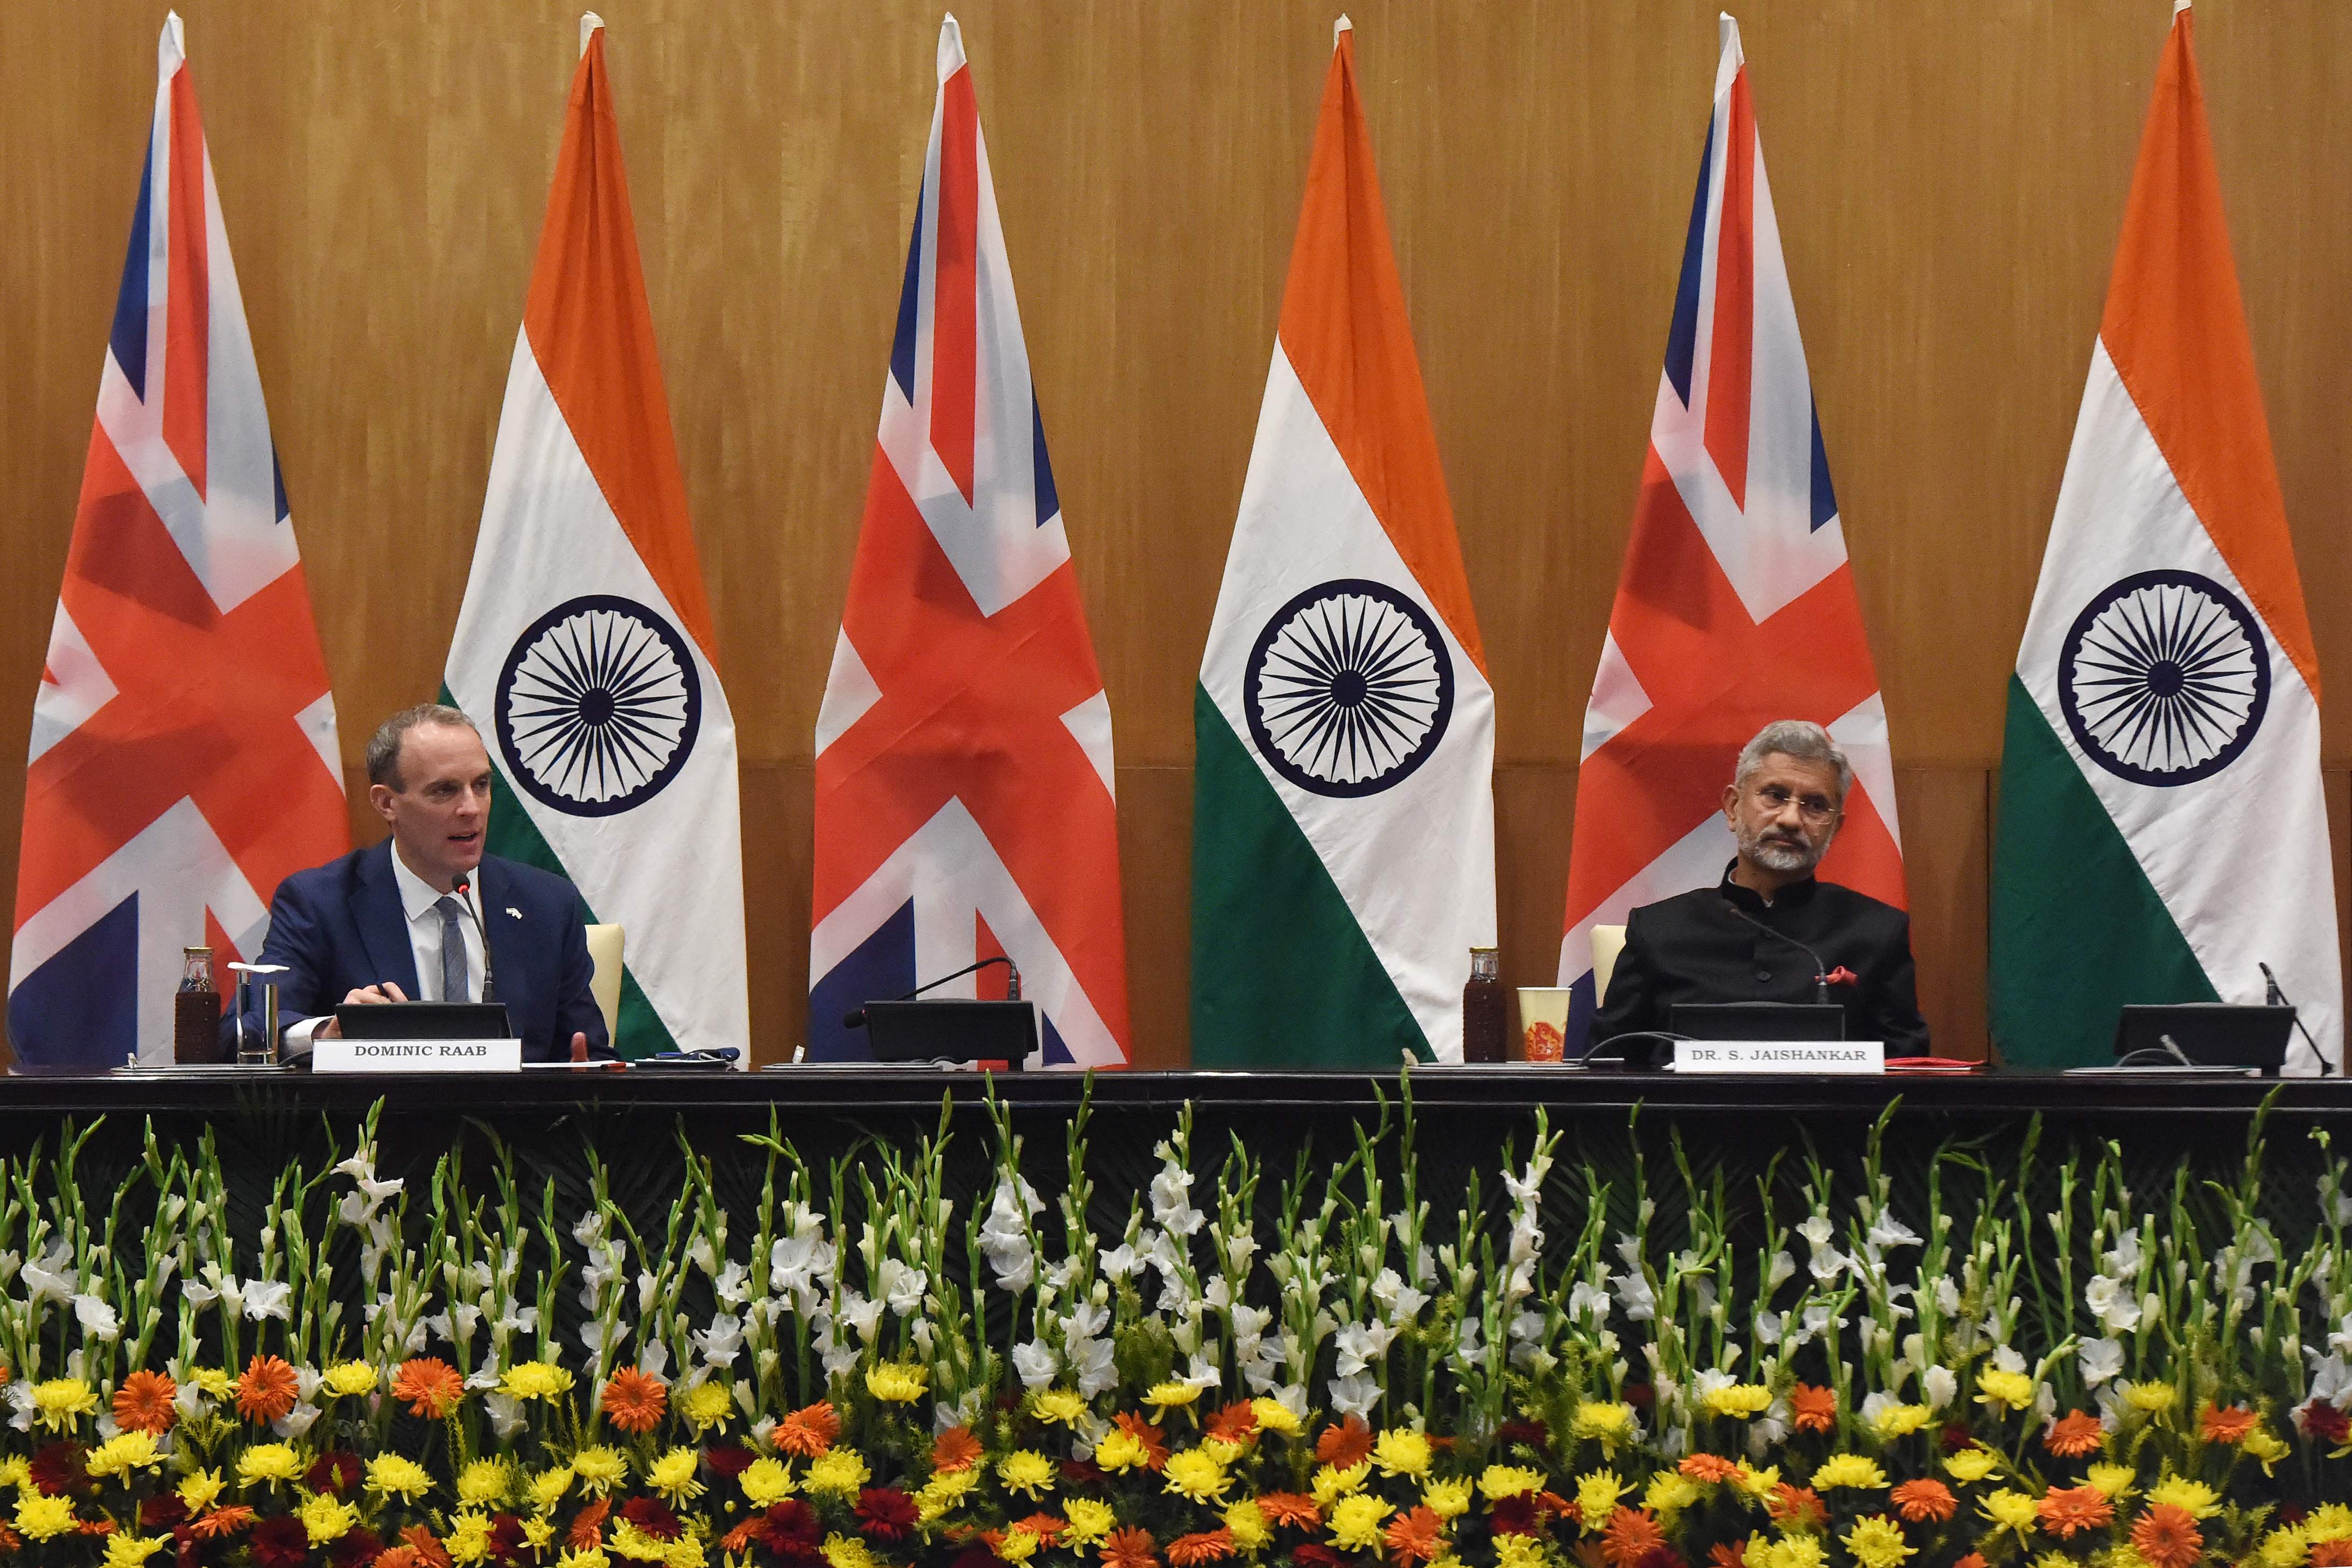 Britain’s Foreign Secretary Dominic Raab and India’s Foreign Minister Subrahmanyam Jaishankar attend a press interaction following their ‘India-UK Ministerial Dialogue’ meeting in New Delhi on December 15, 2020